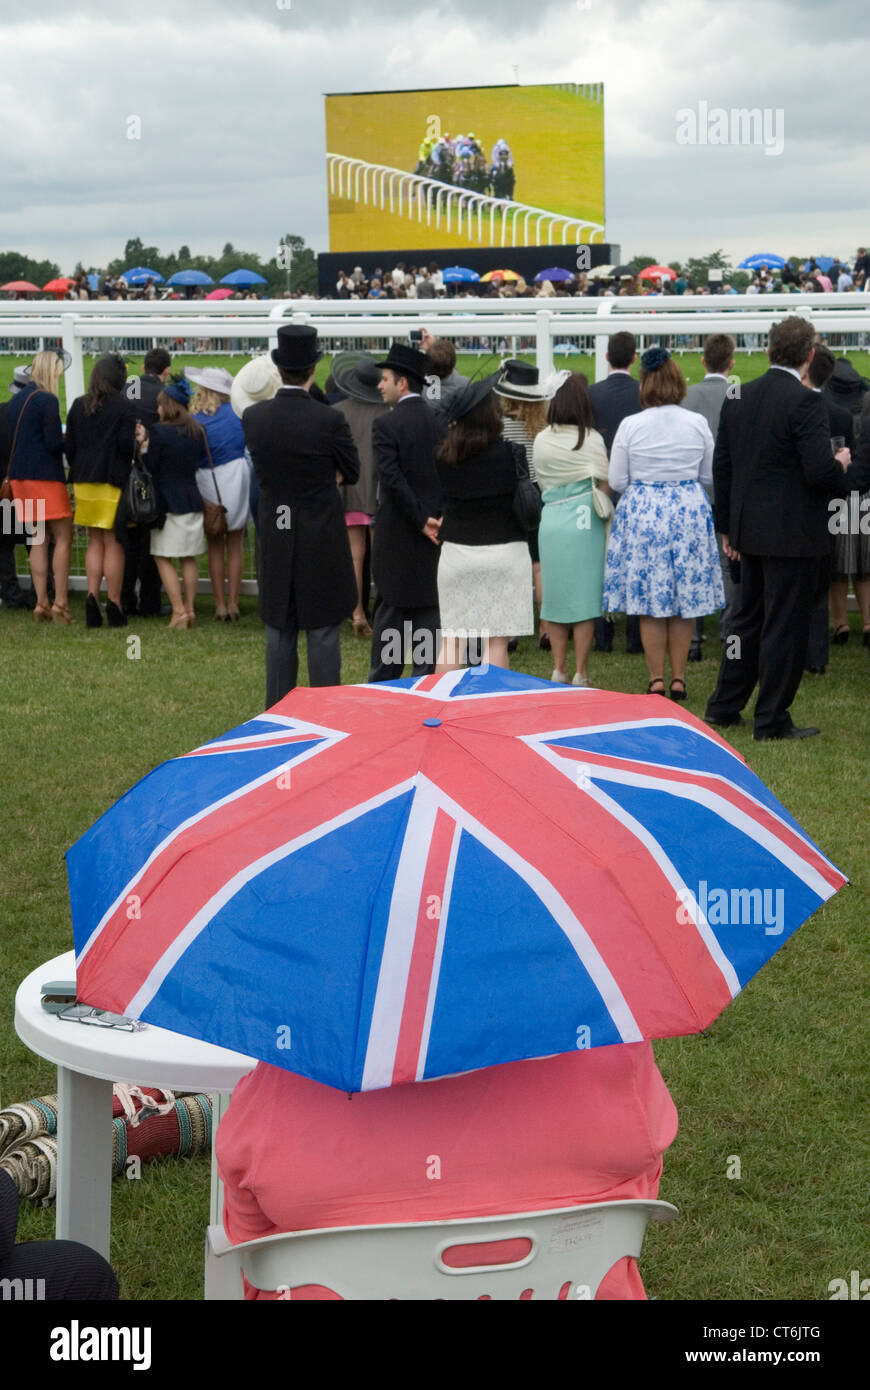 Union Jack umbrella rainy day Royal Ascot horse racing watching the horse runner on a huge outside broadcast television TV screen Berkshire 2012 2010s UK HOMER SYKES Stock Photo